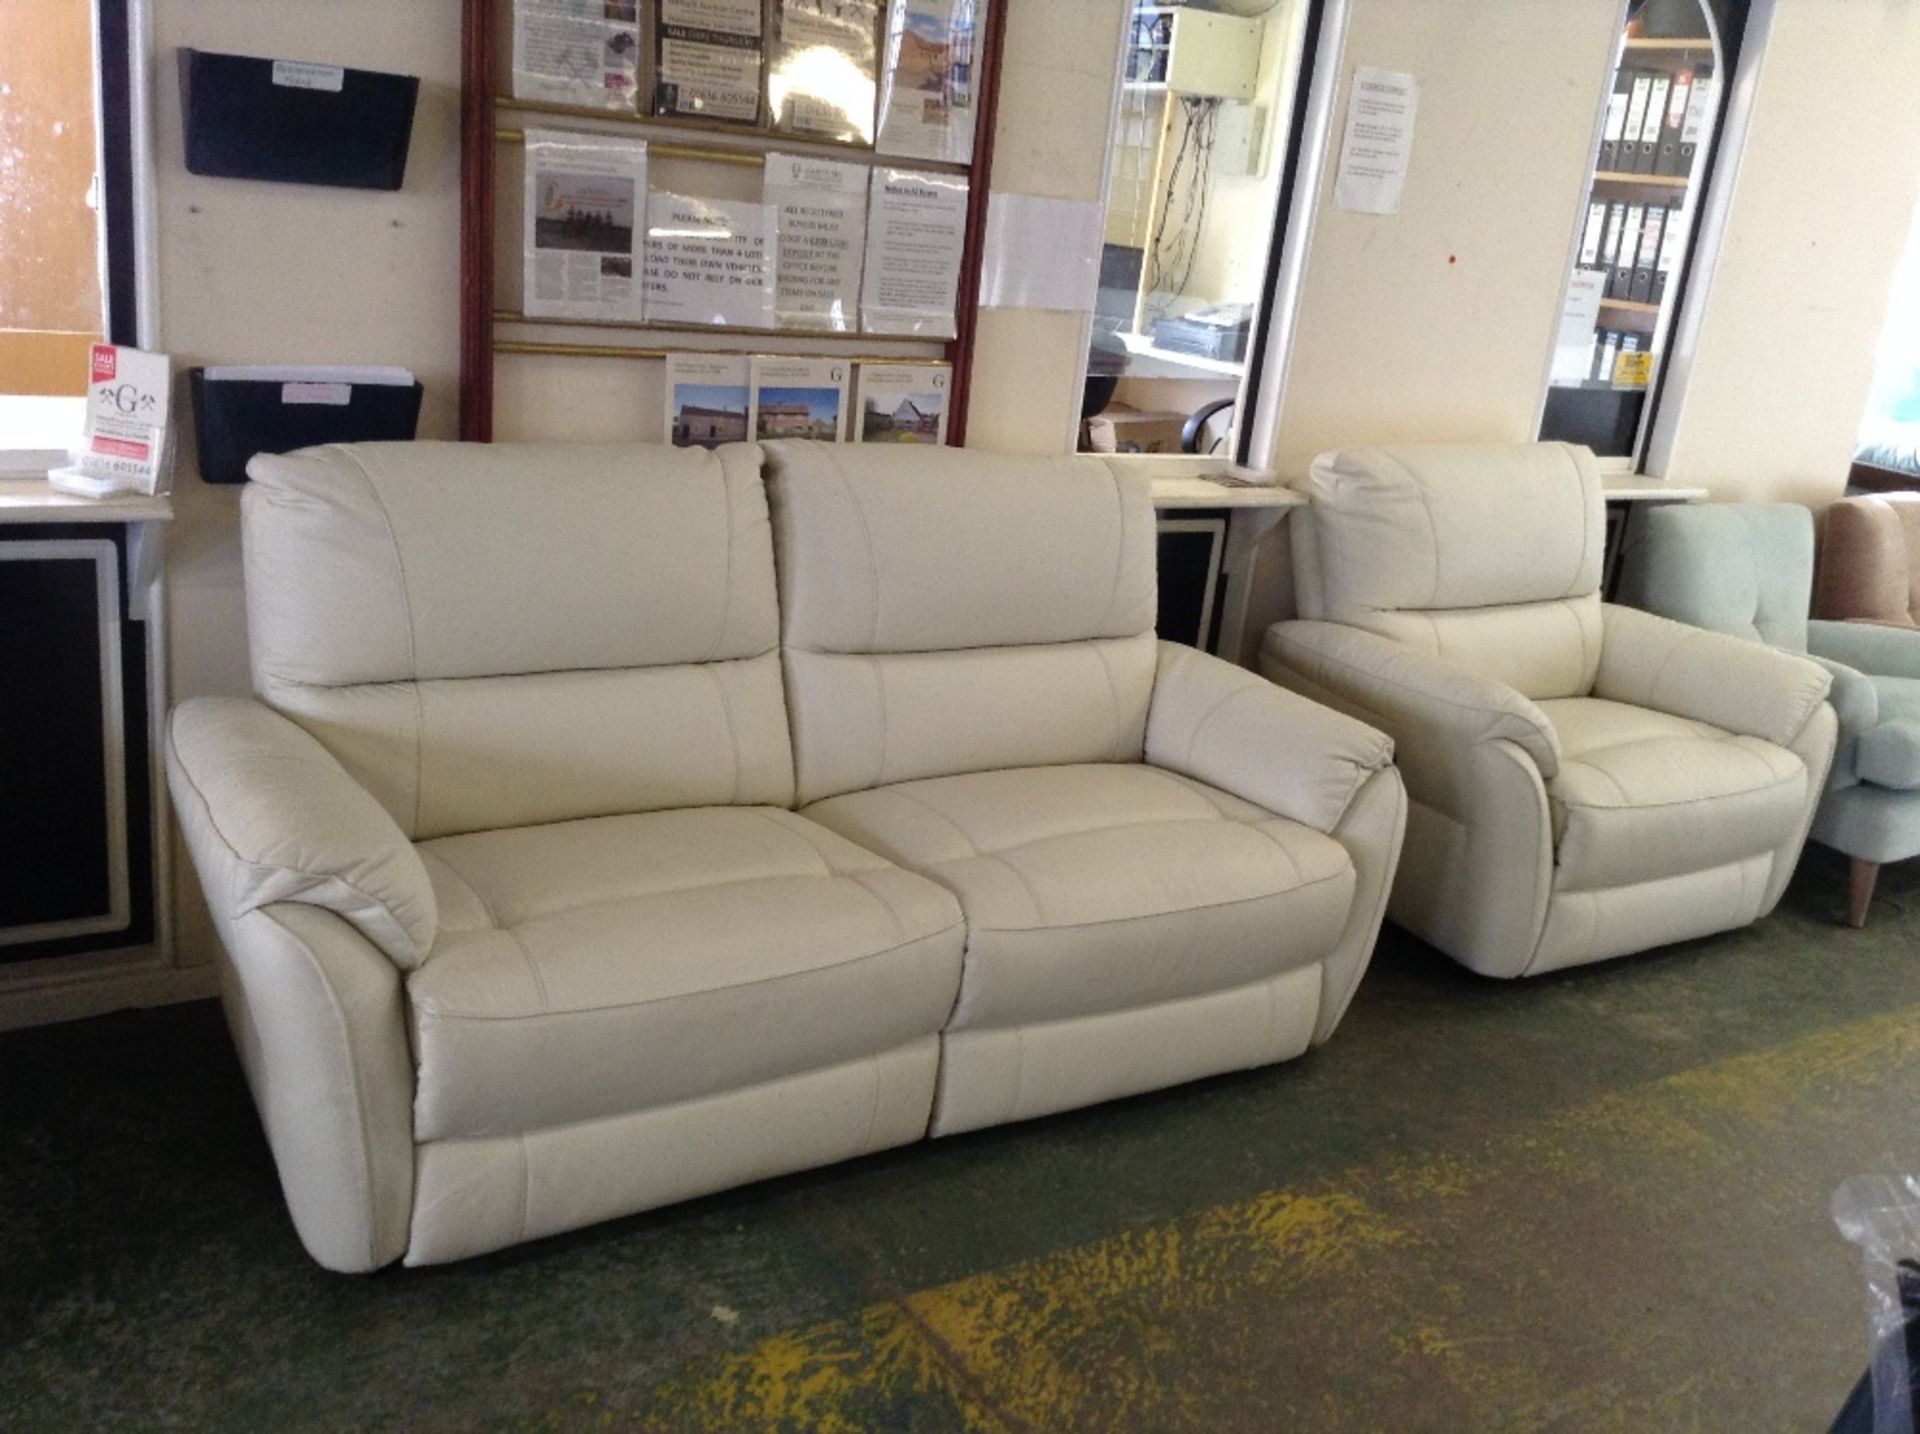 WHITE LEATHER ELECTRIC RECLINING 3 SEATER SOFA AND